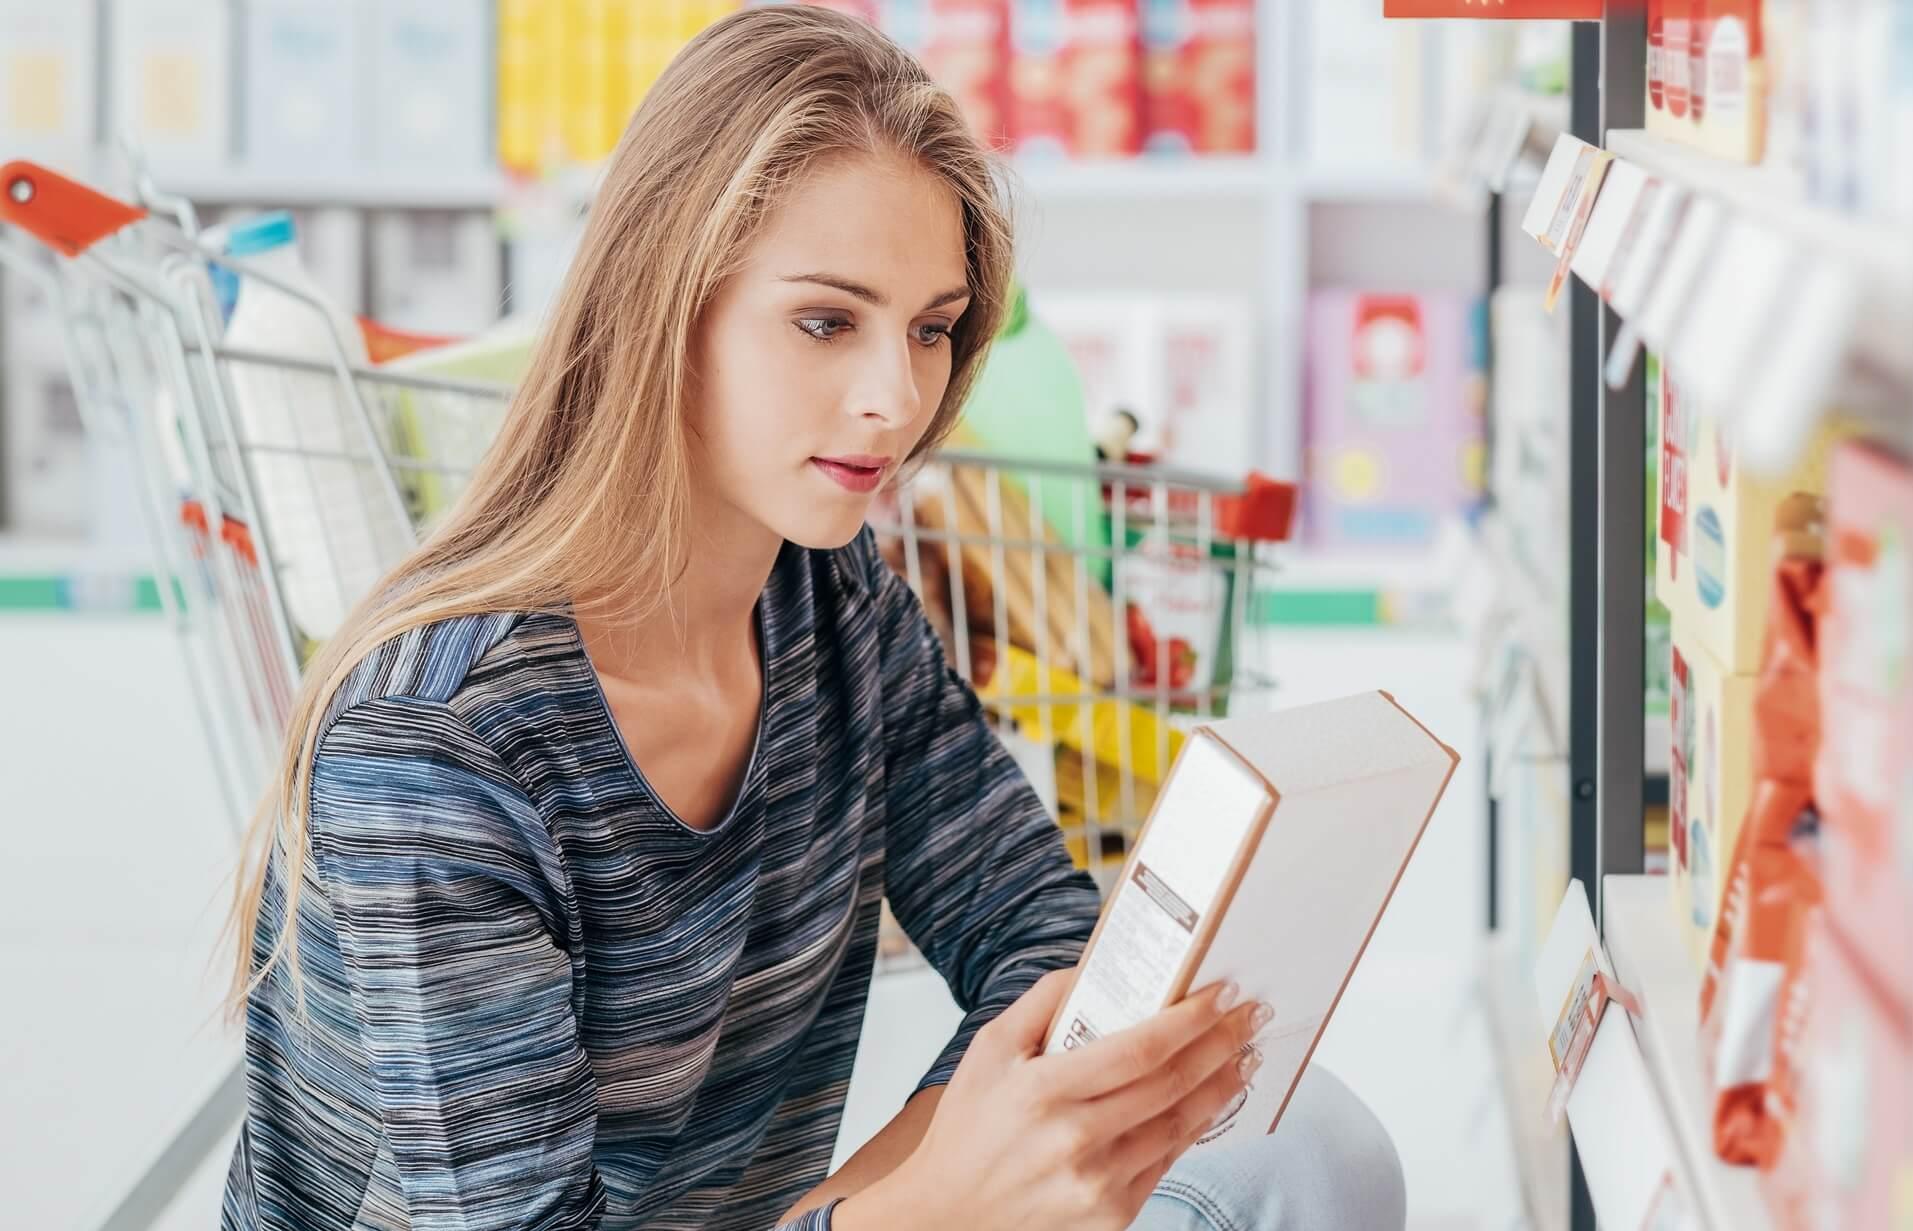 Photo of young woman reading food nutrition label.